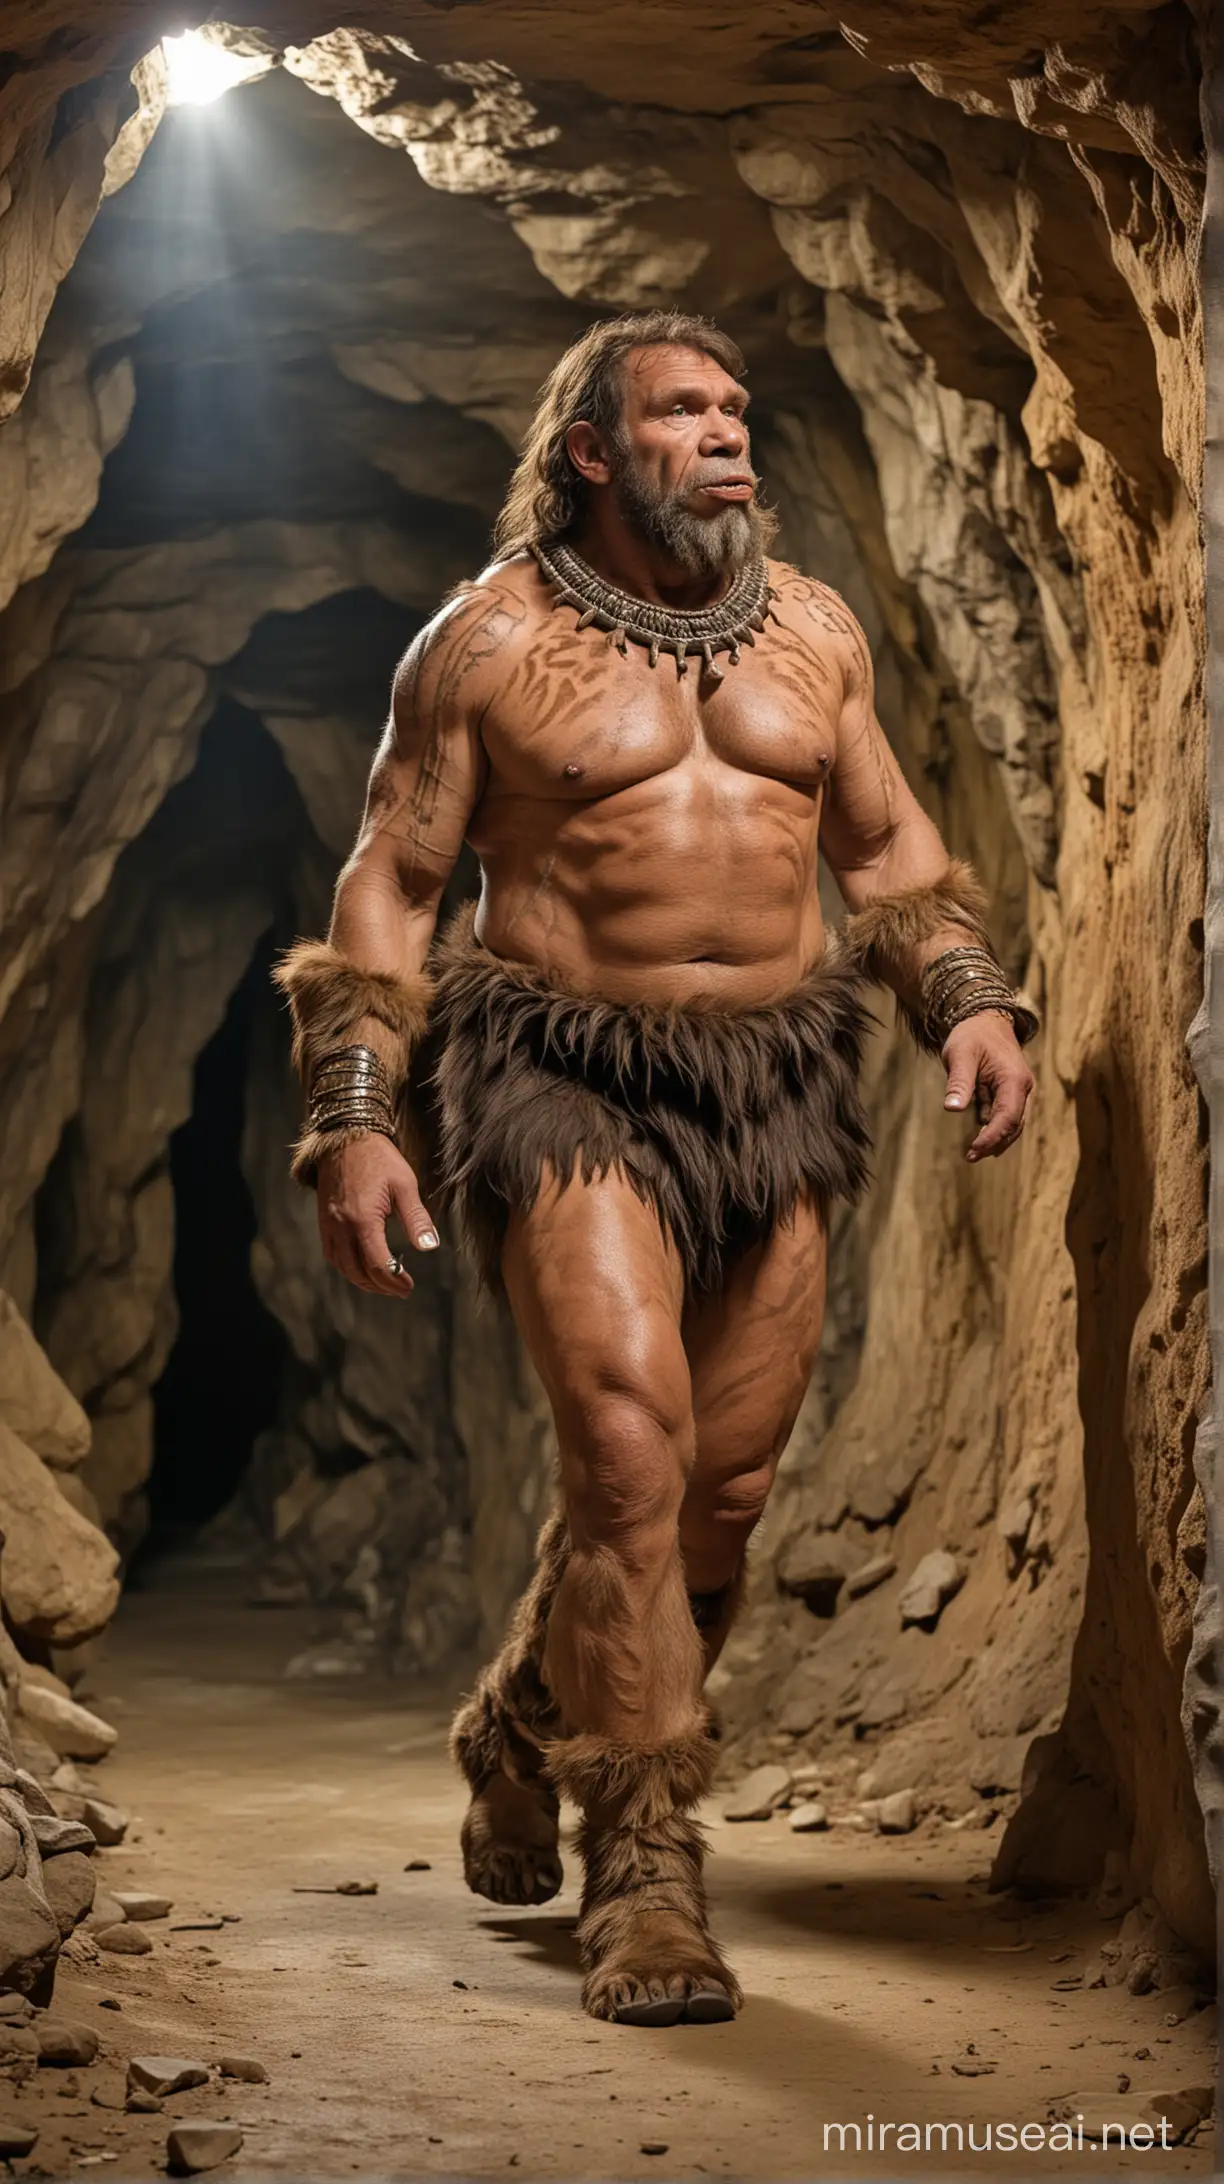 Neanderthal in Cave Catwalk in Bear and Rhino Suit with Cigarette